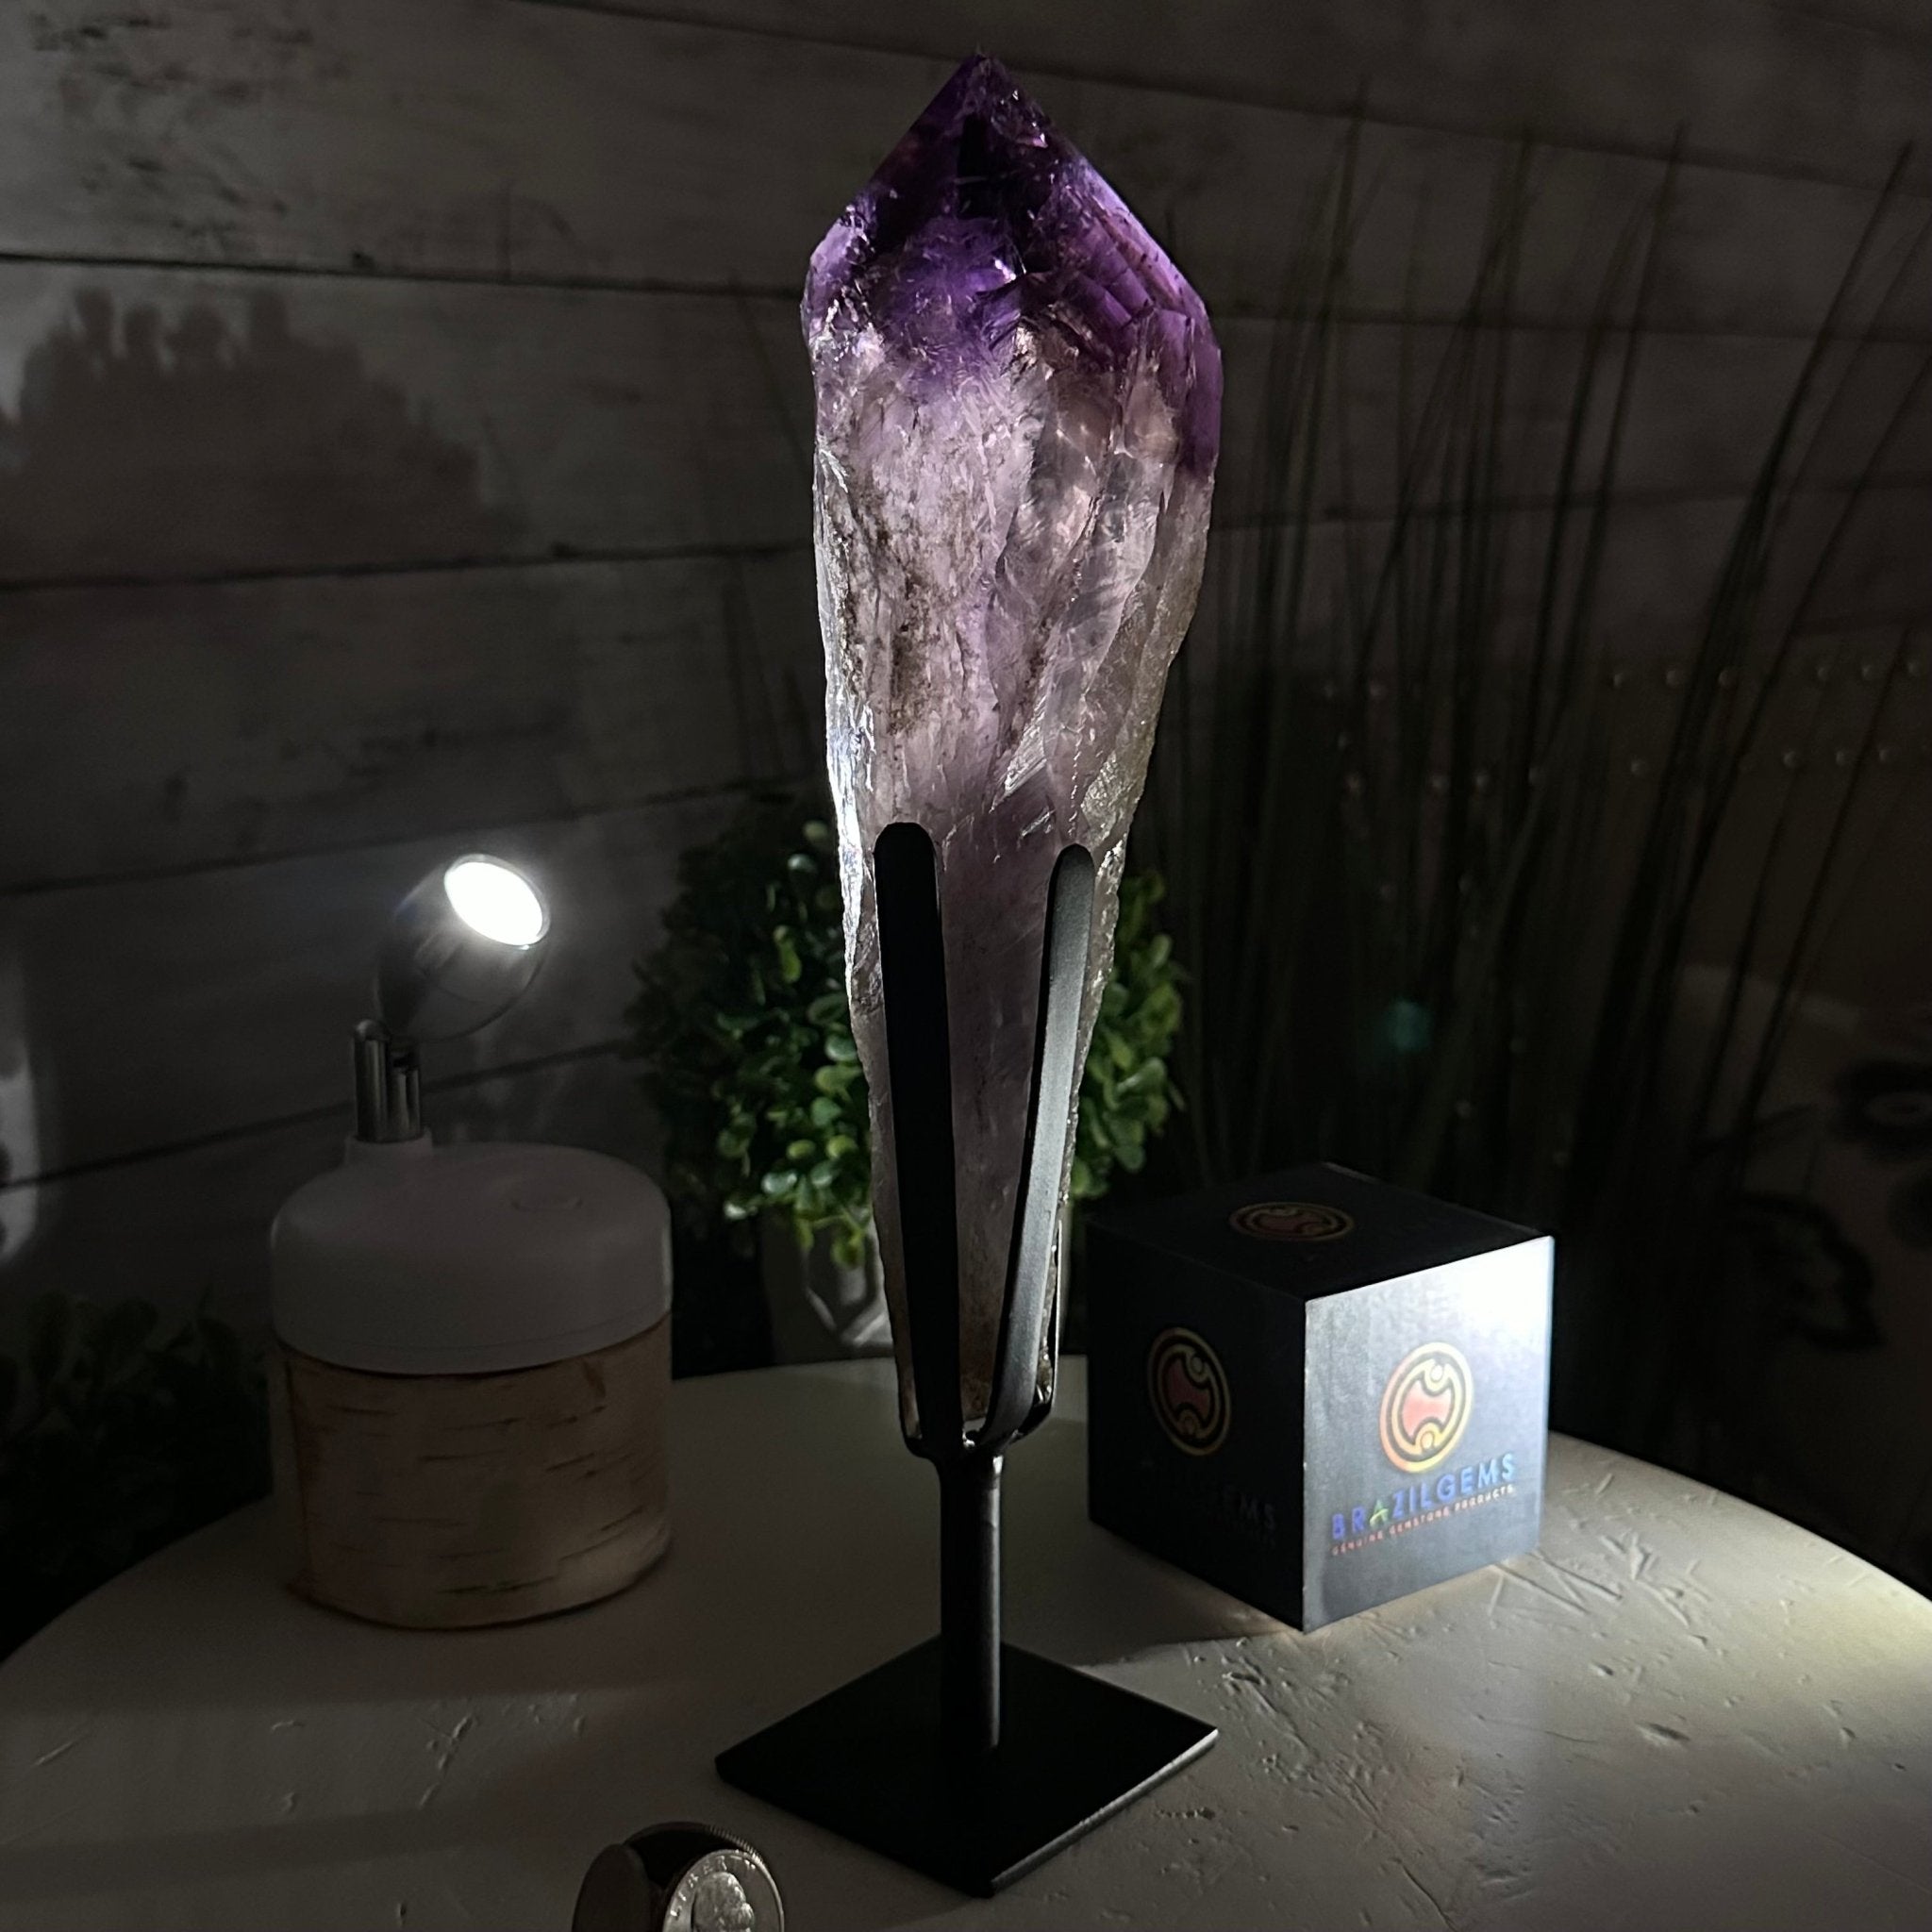 Super Quality Amethyst Wand on a Metal Stand, 1.9 lbs & 10.8" Tall #3123AM-005 - Brazil GemsBrazil GemsSuper Quality Amethyst Wand on a Metal Stand, 1.9 lbs & 10.8" Tall #3123AM-005Clusters on Fixed Bases3123AM-005